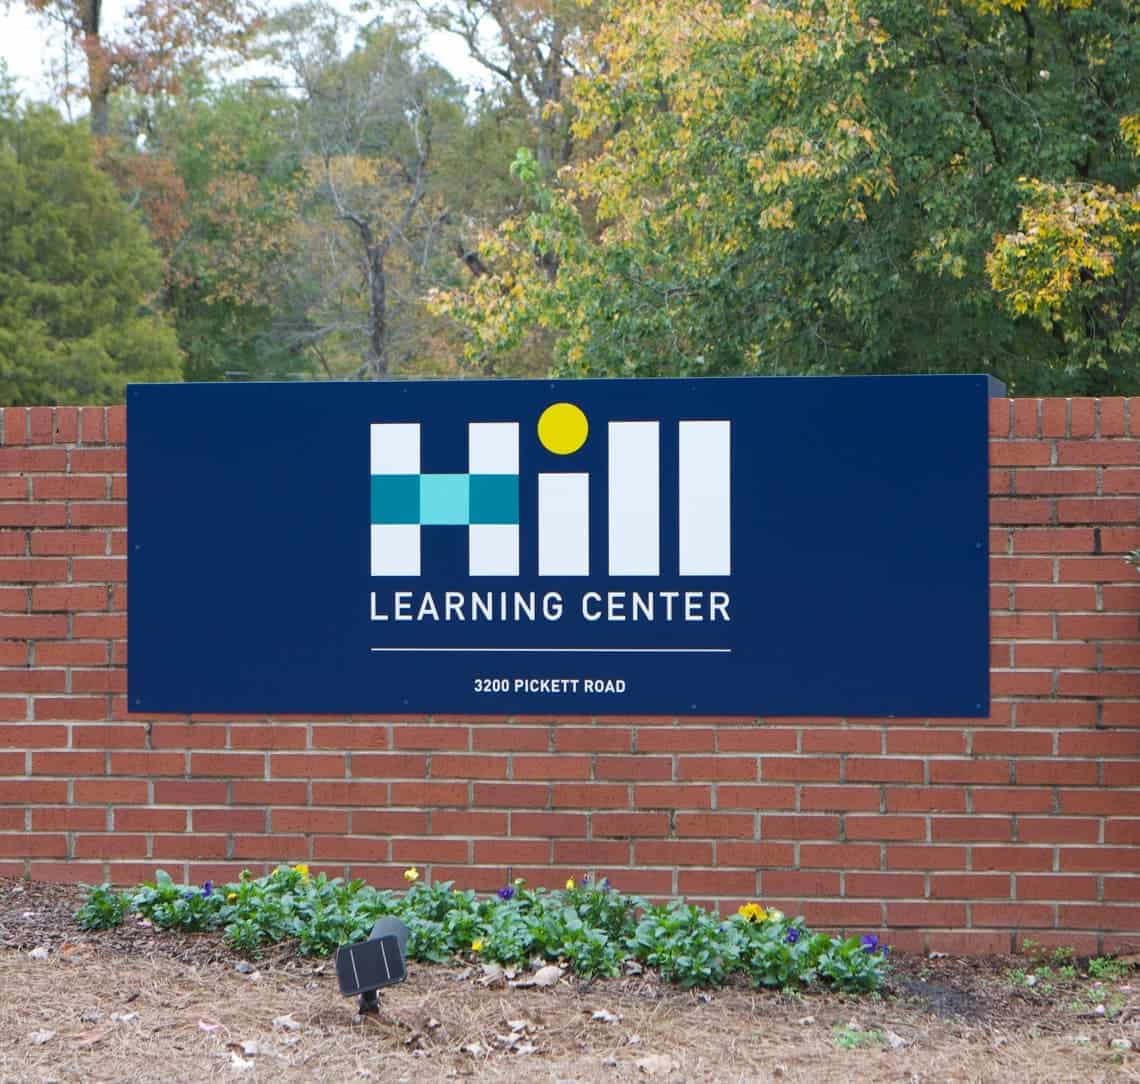 Hill Learning Center building sign